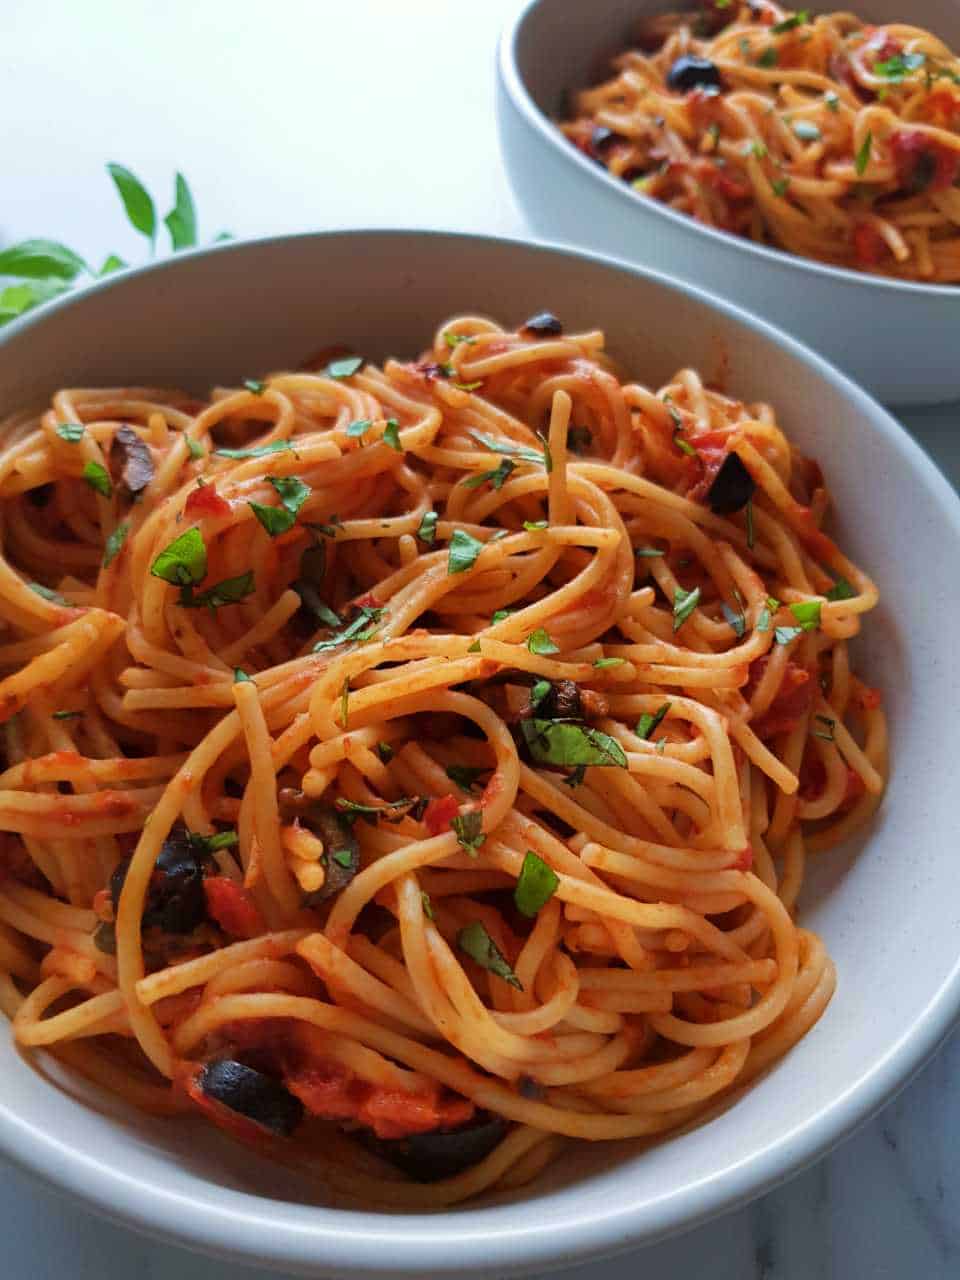 Can You Reheat Salmon Pasta In Microwave Spaghetti Alla Puttanesca Hint Of Healthy